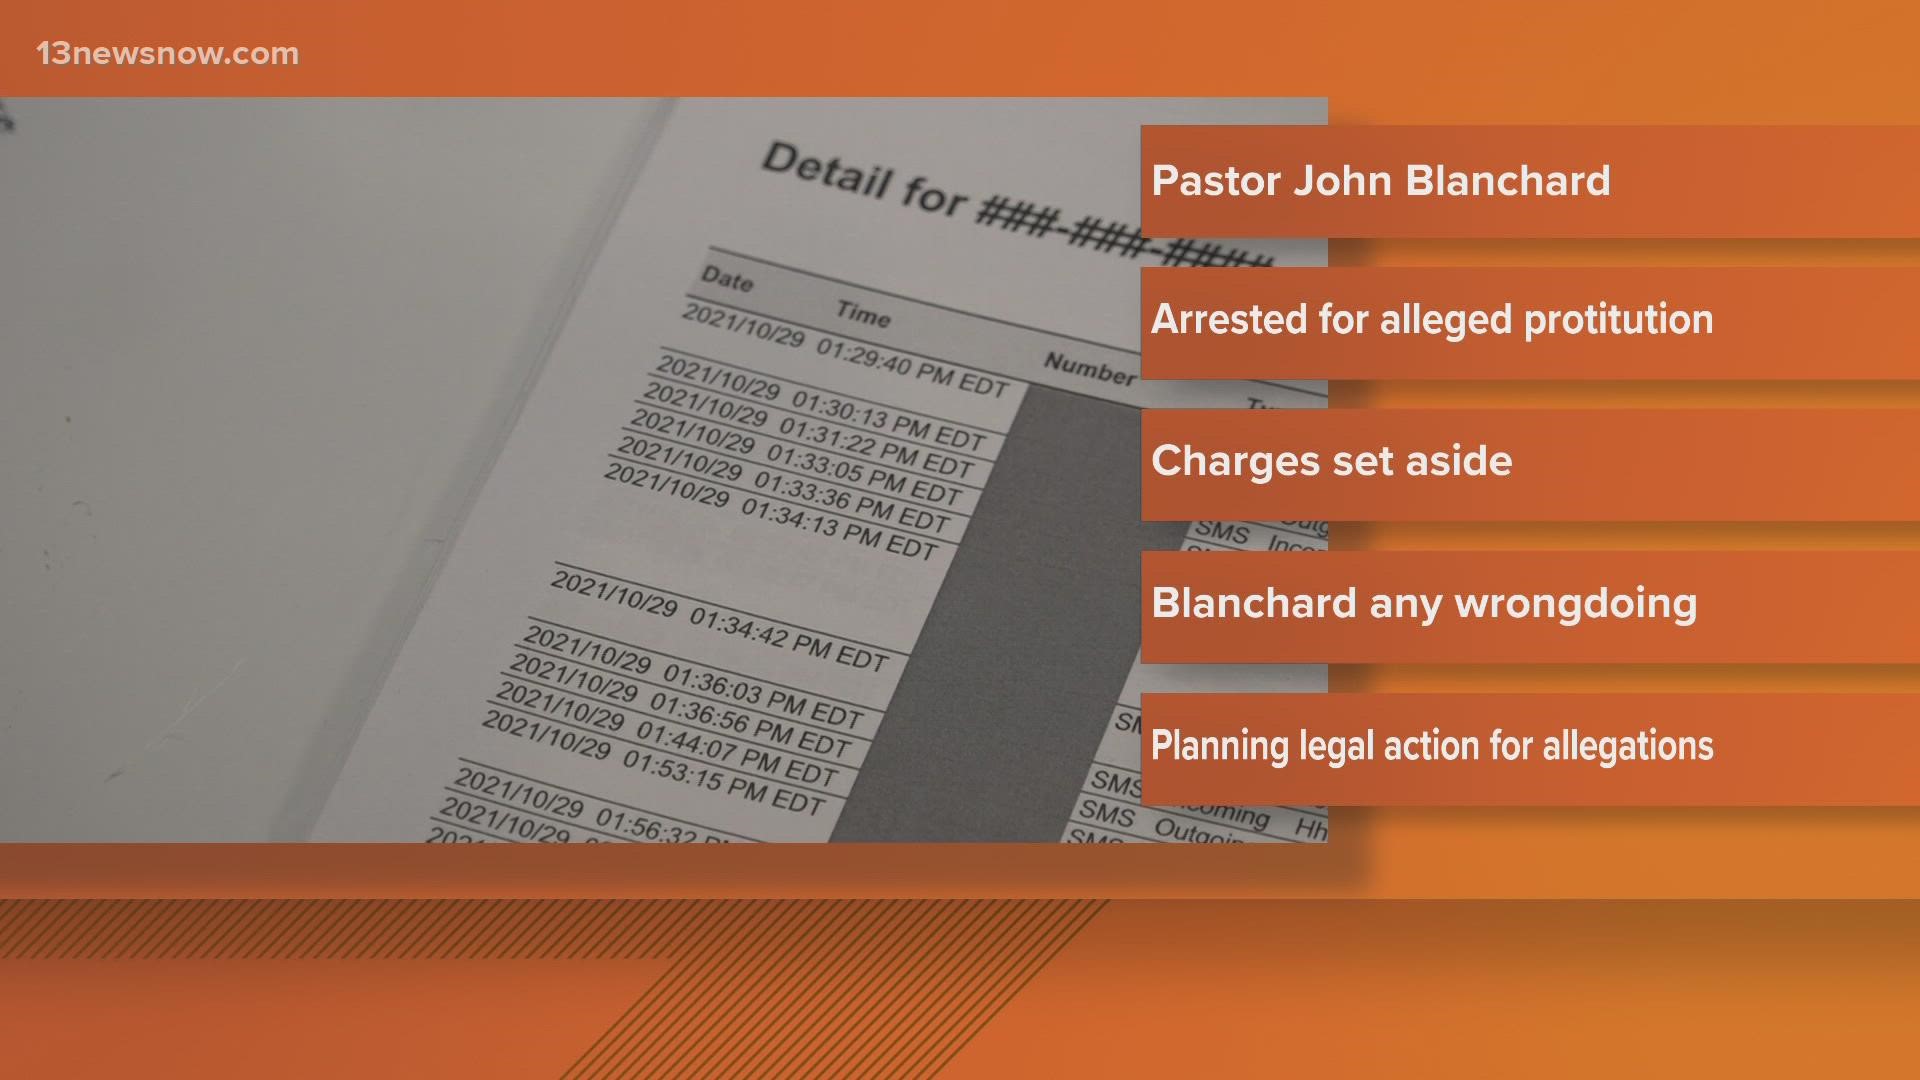 Pastor John Blanchard has denied any wrong-doing in his arrest, but charges could be brought back again in the future.